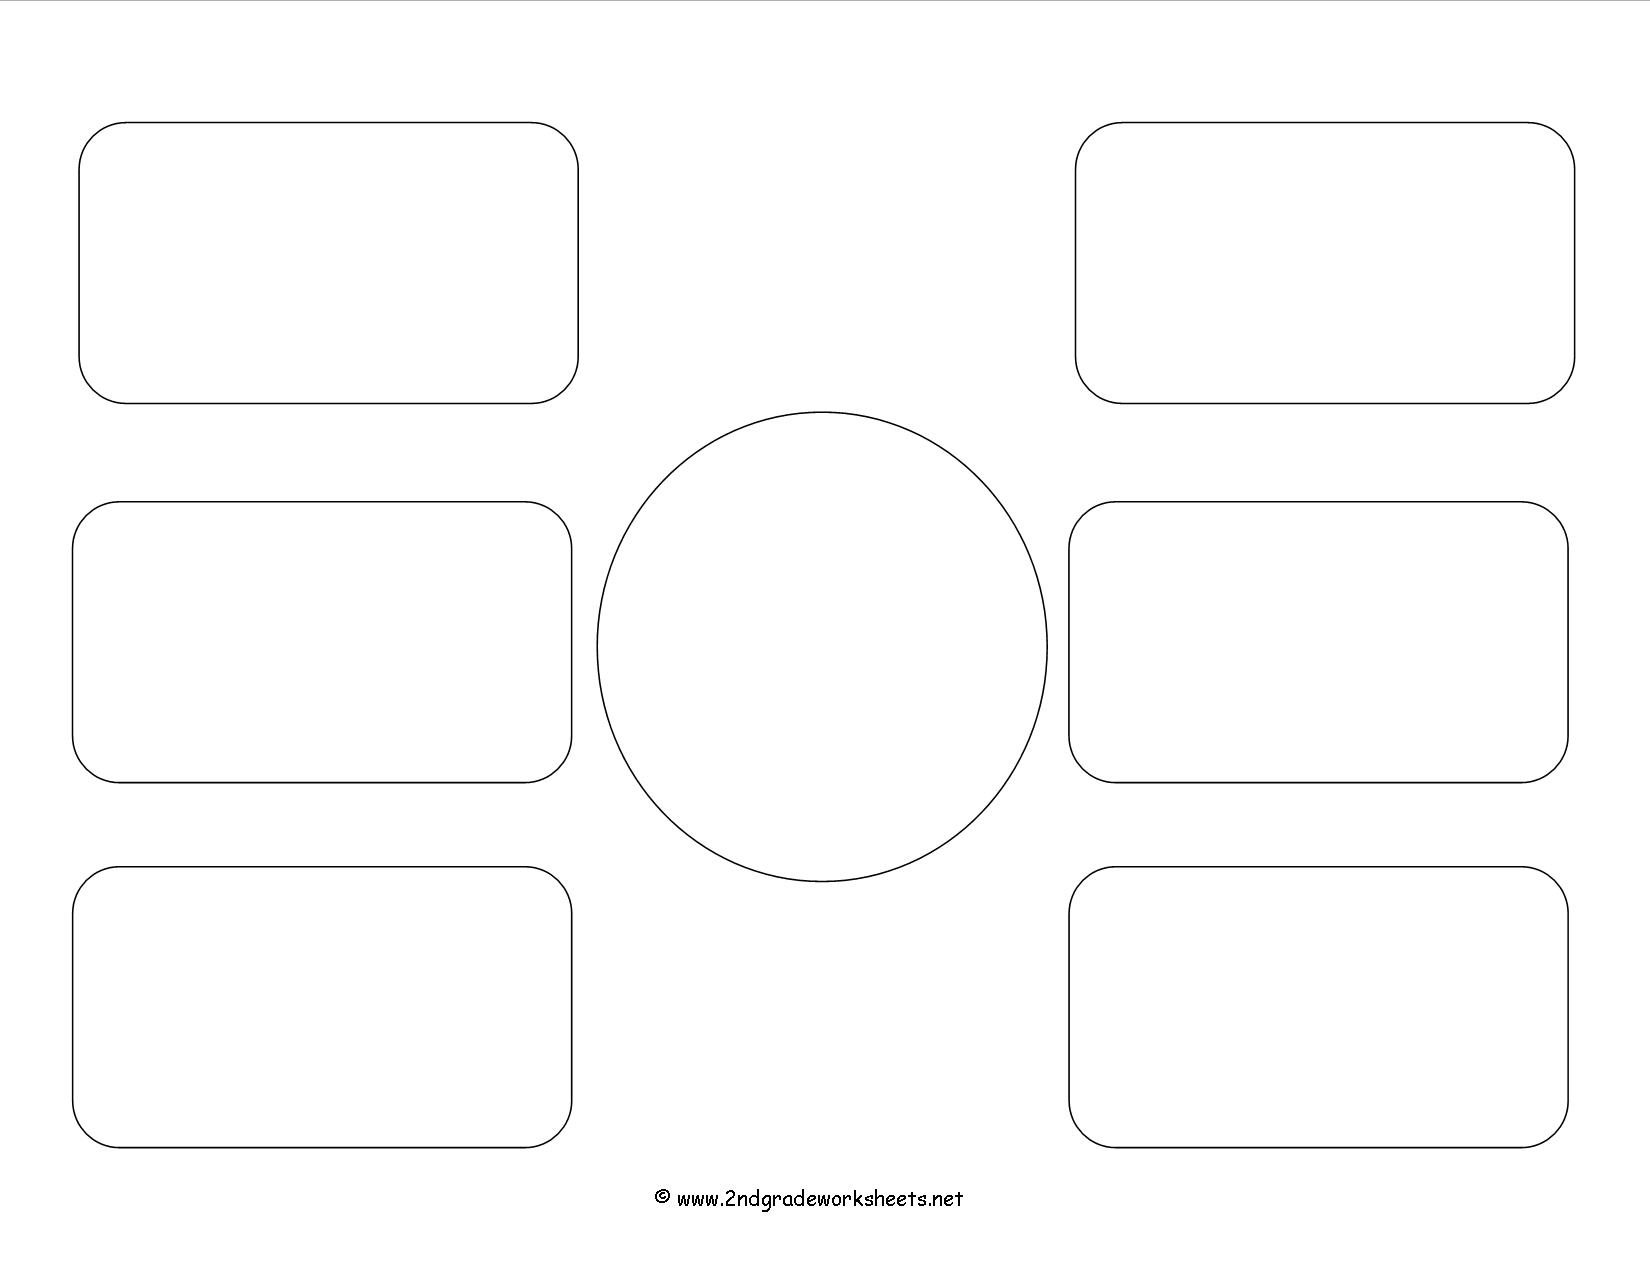 Friendly Letter Graphic Organizer Image